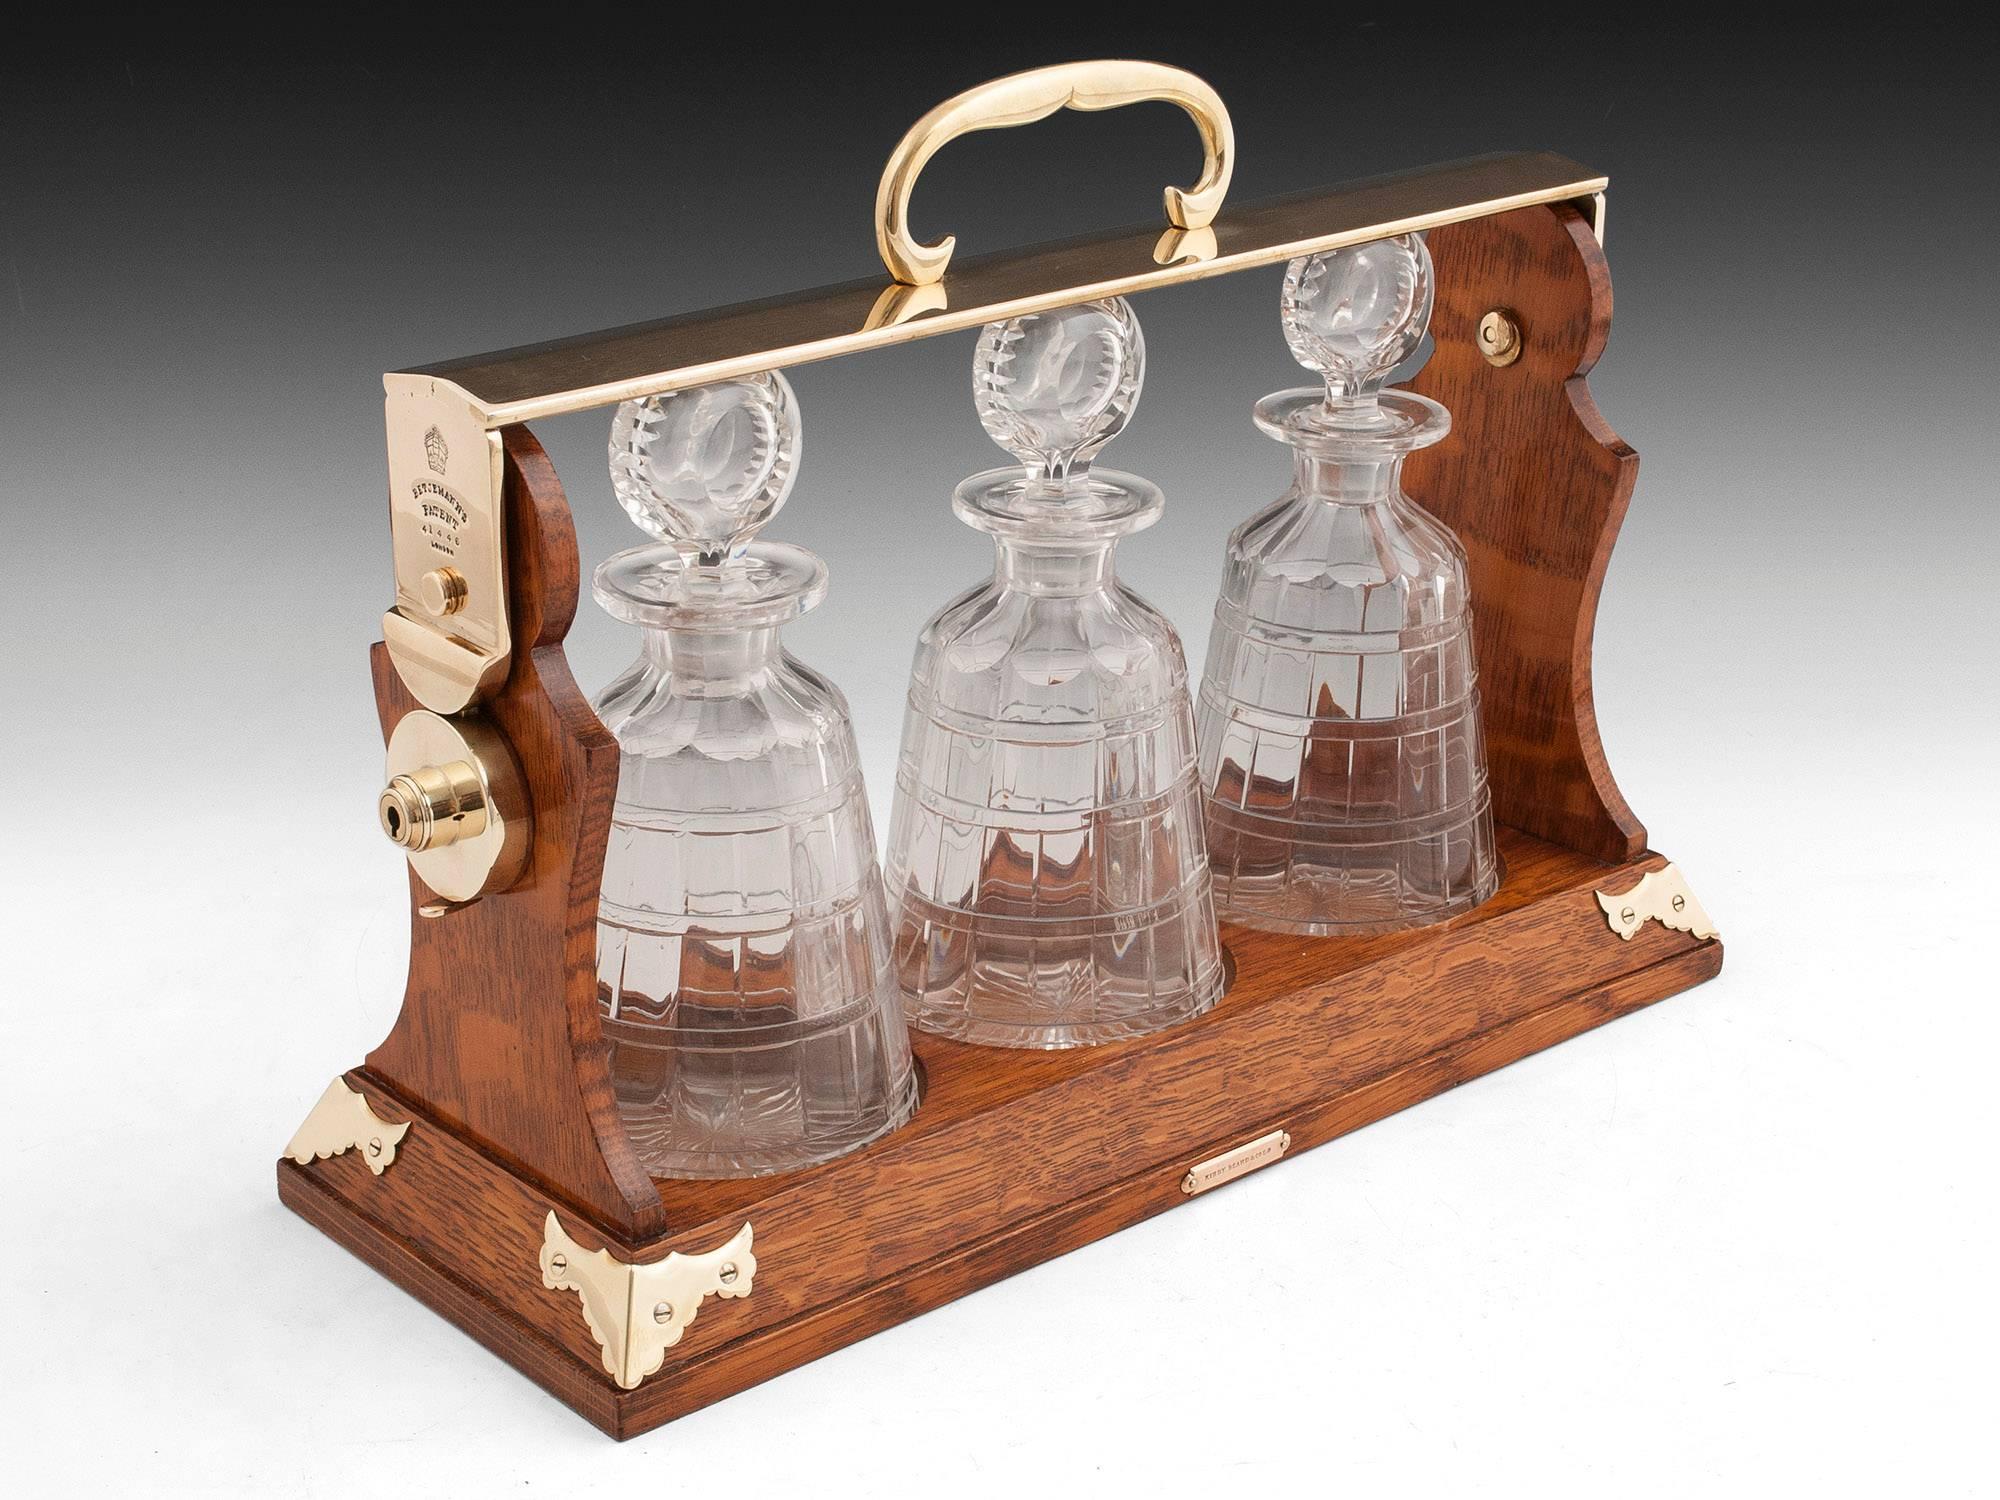 Oak Betjemann's Tantalus. Featuring ornate brass corner supports, carry handle and escutcheon.

The tantalus holds three unusual cut lead crystal decanters of cylindrical tapering form with cut-glass stoppers. The decanters can be removed once the